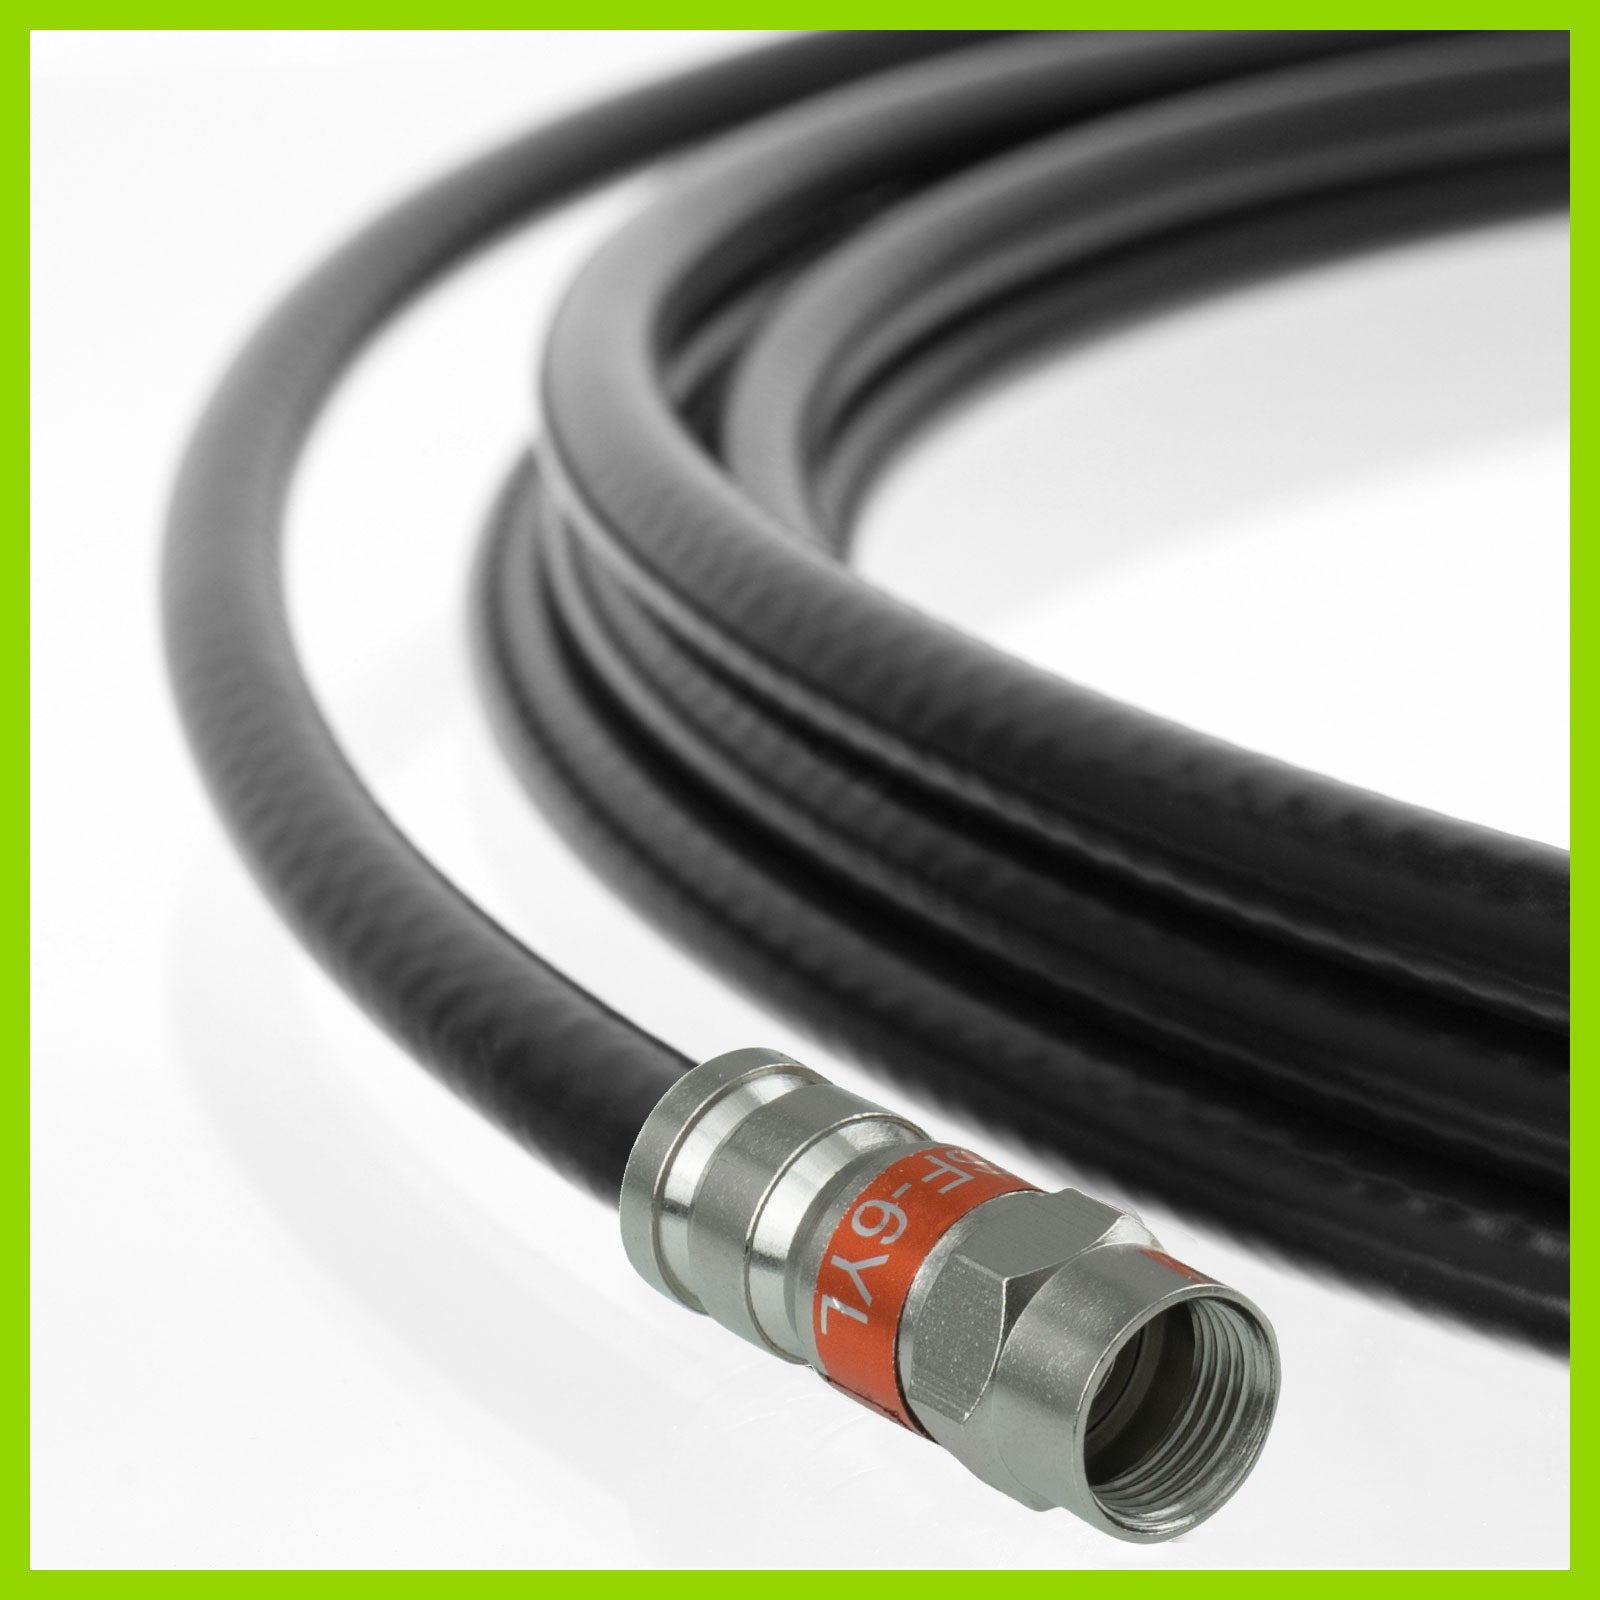 Waterproof Compression Plug for RG6 Cable - 10 Pack